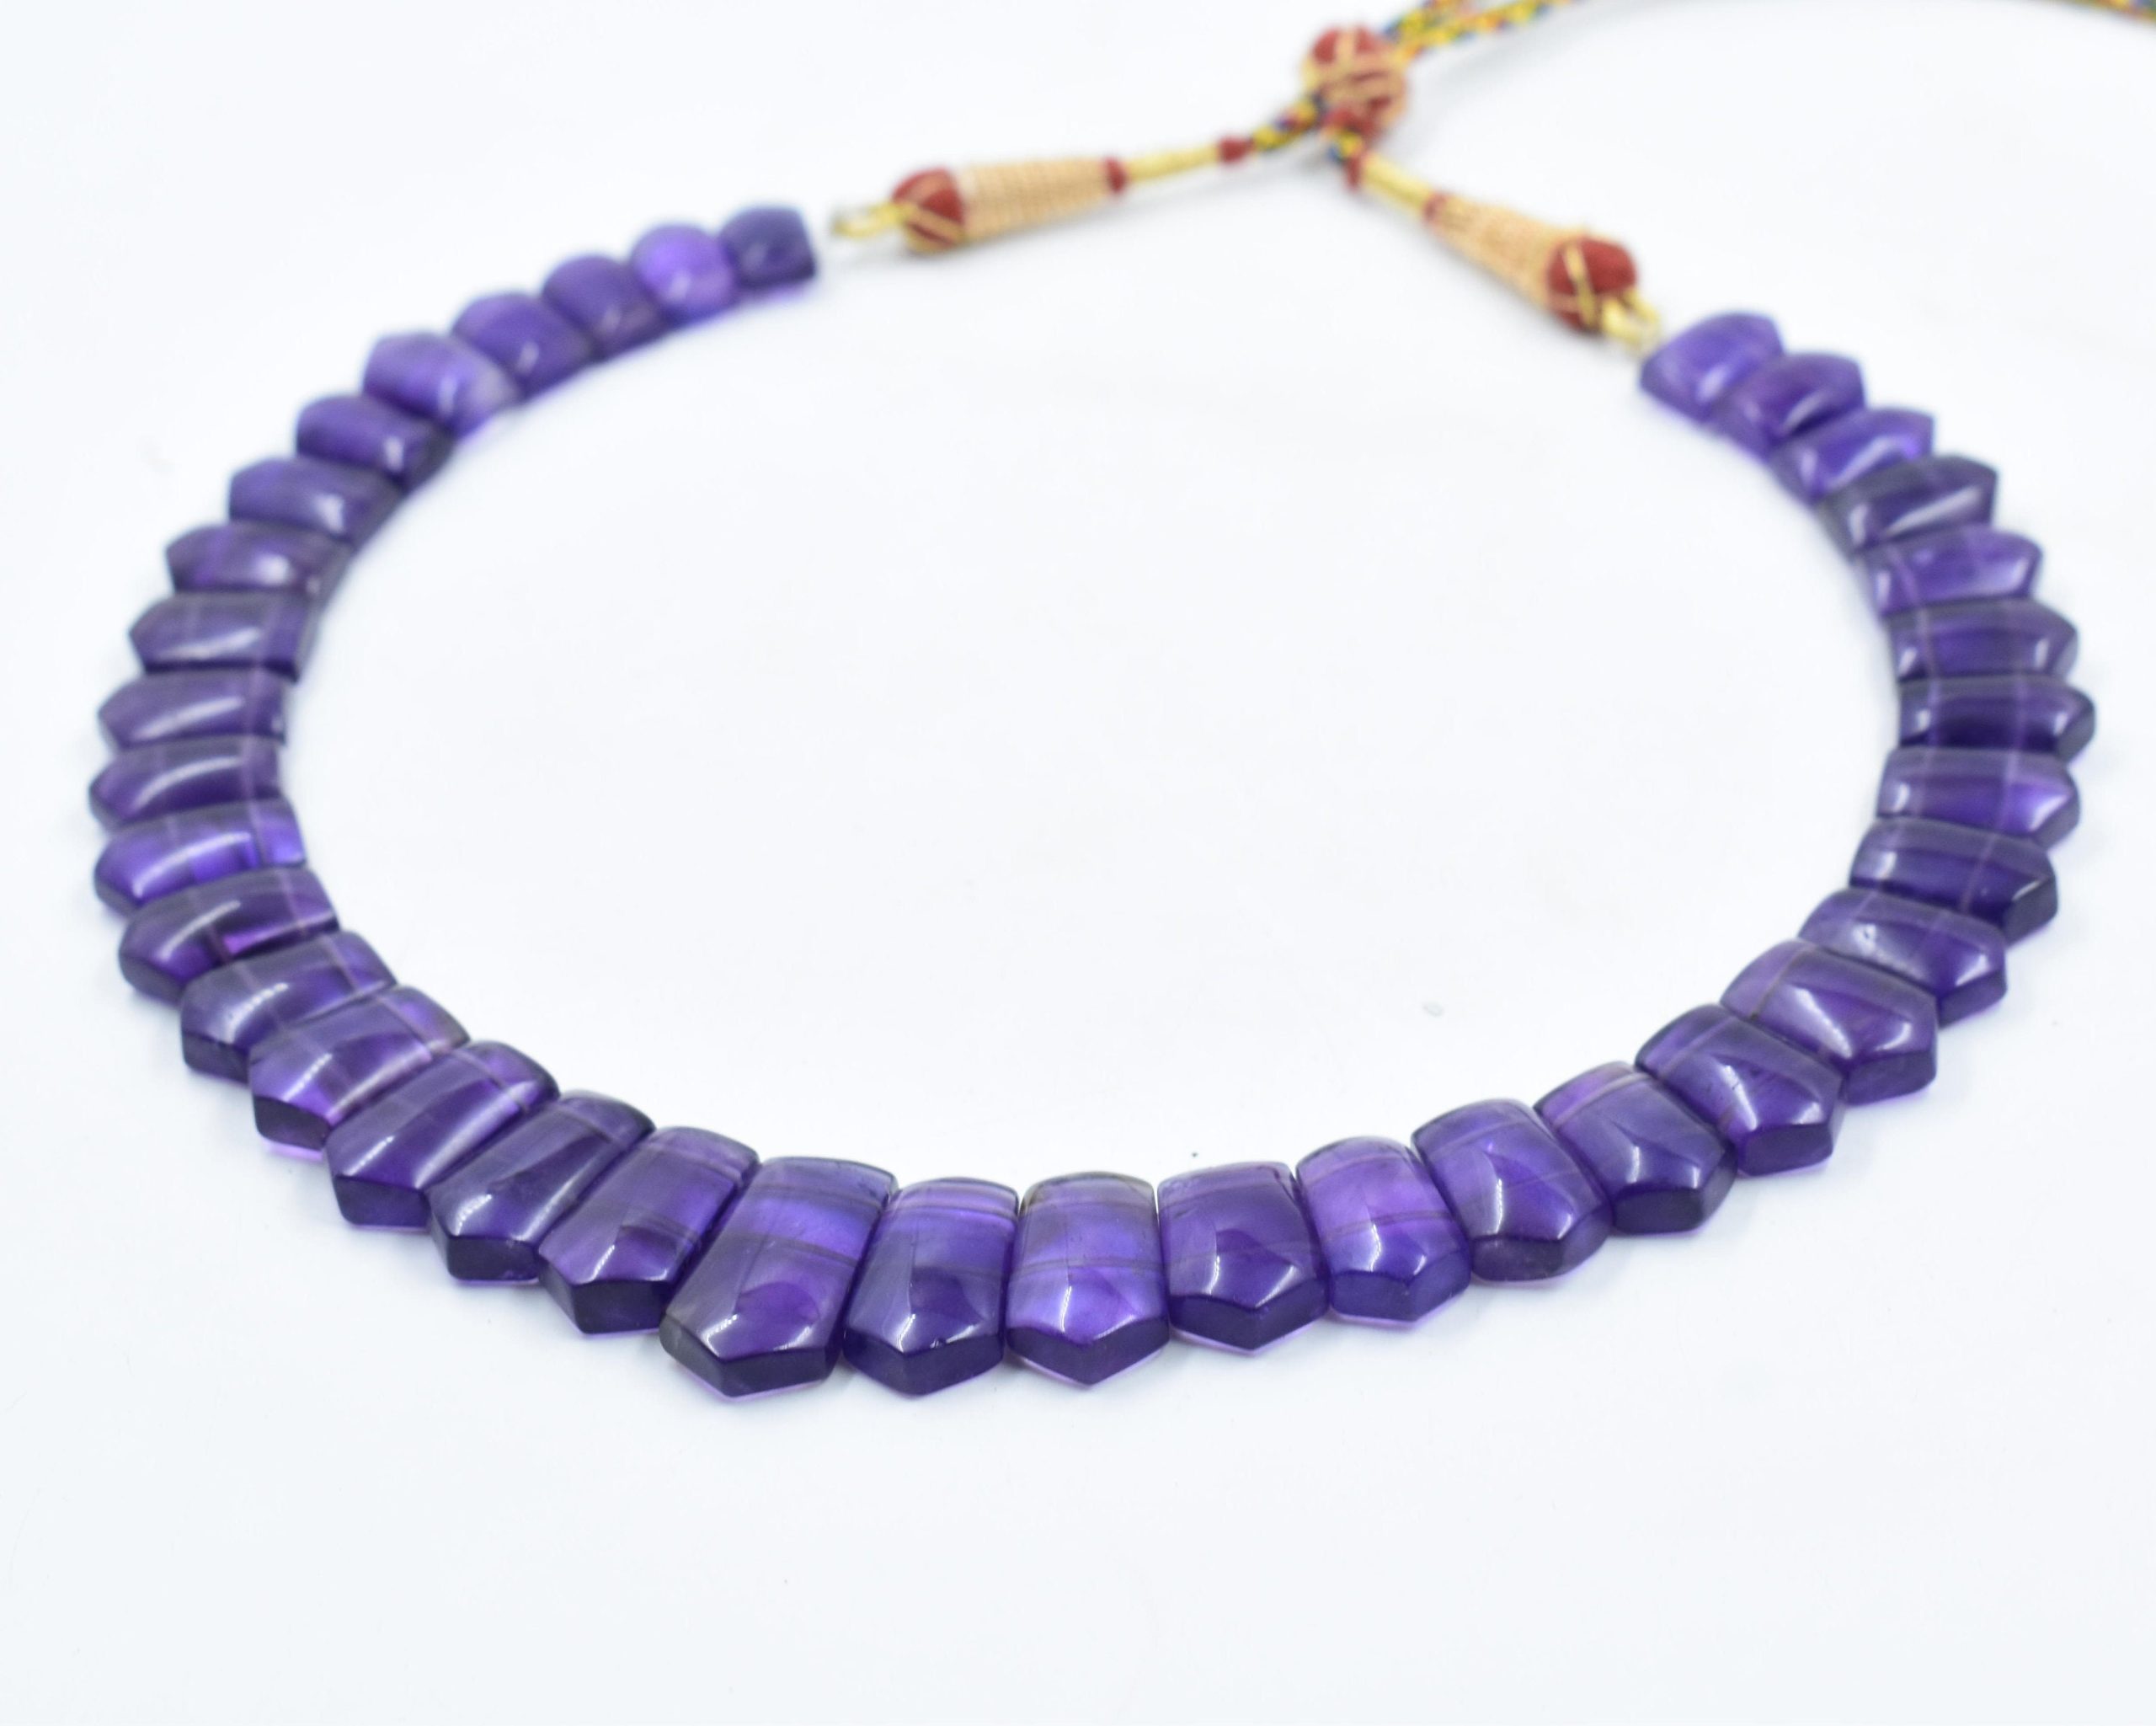 100%Natural Amethyst Handmade Necklace,Collar Necklace,Princess Necklace,rondelles beads,Gemstone Art,,Matinee Necklace,Handicraft Necklace. | Save 33% - Rajasthan Living 15